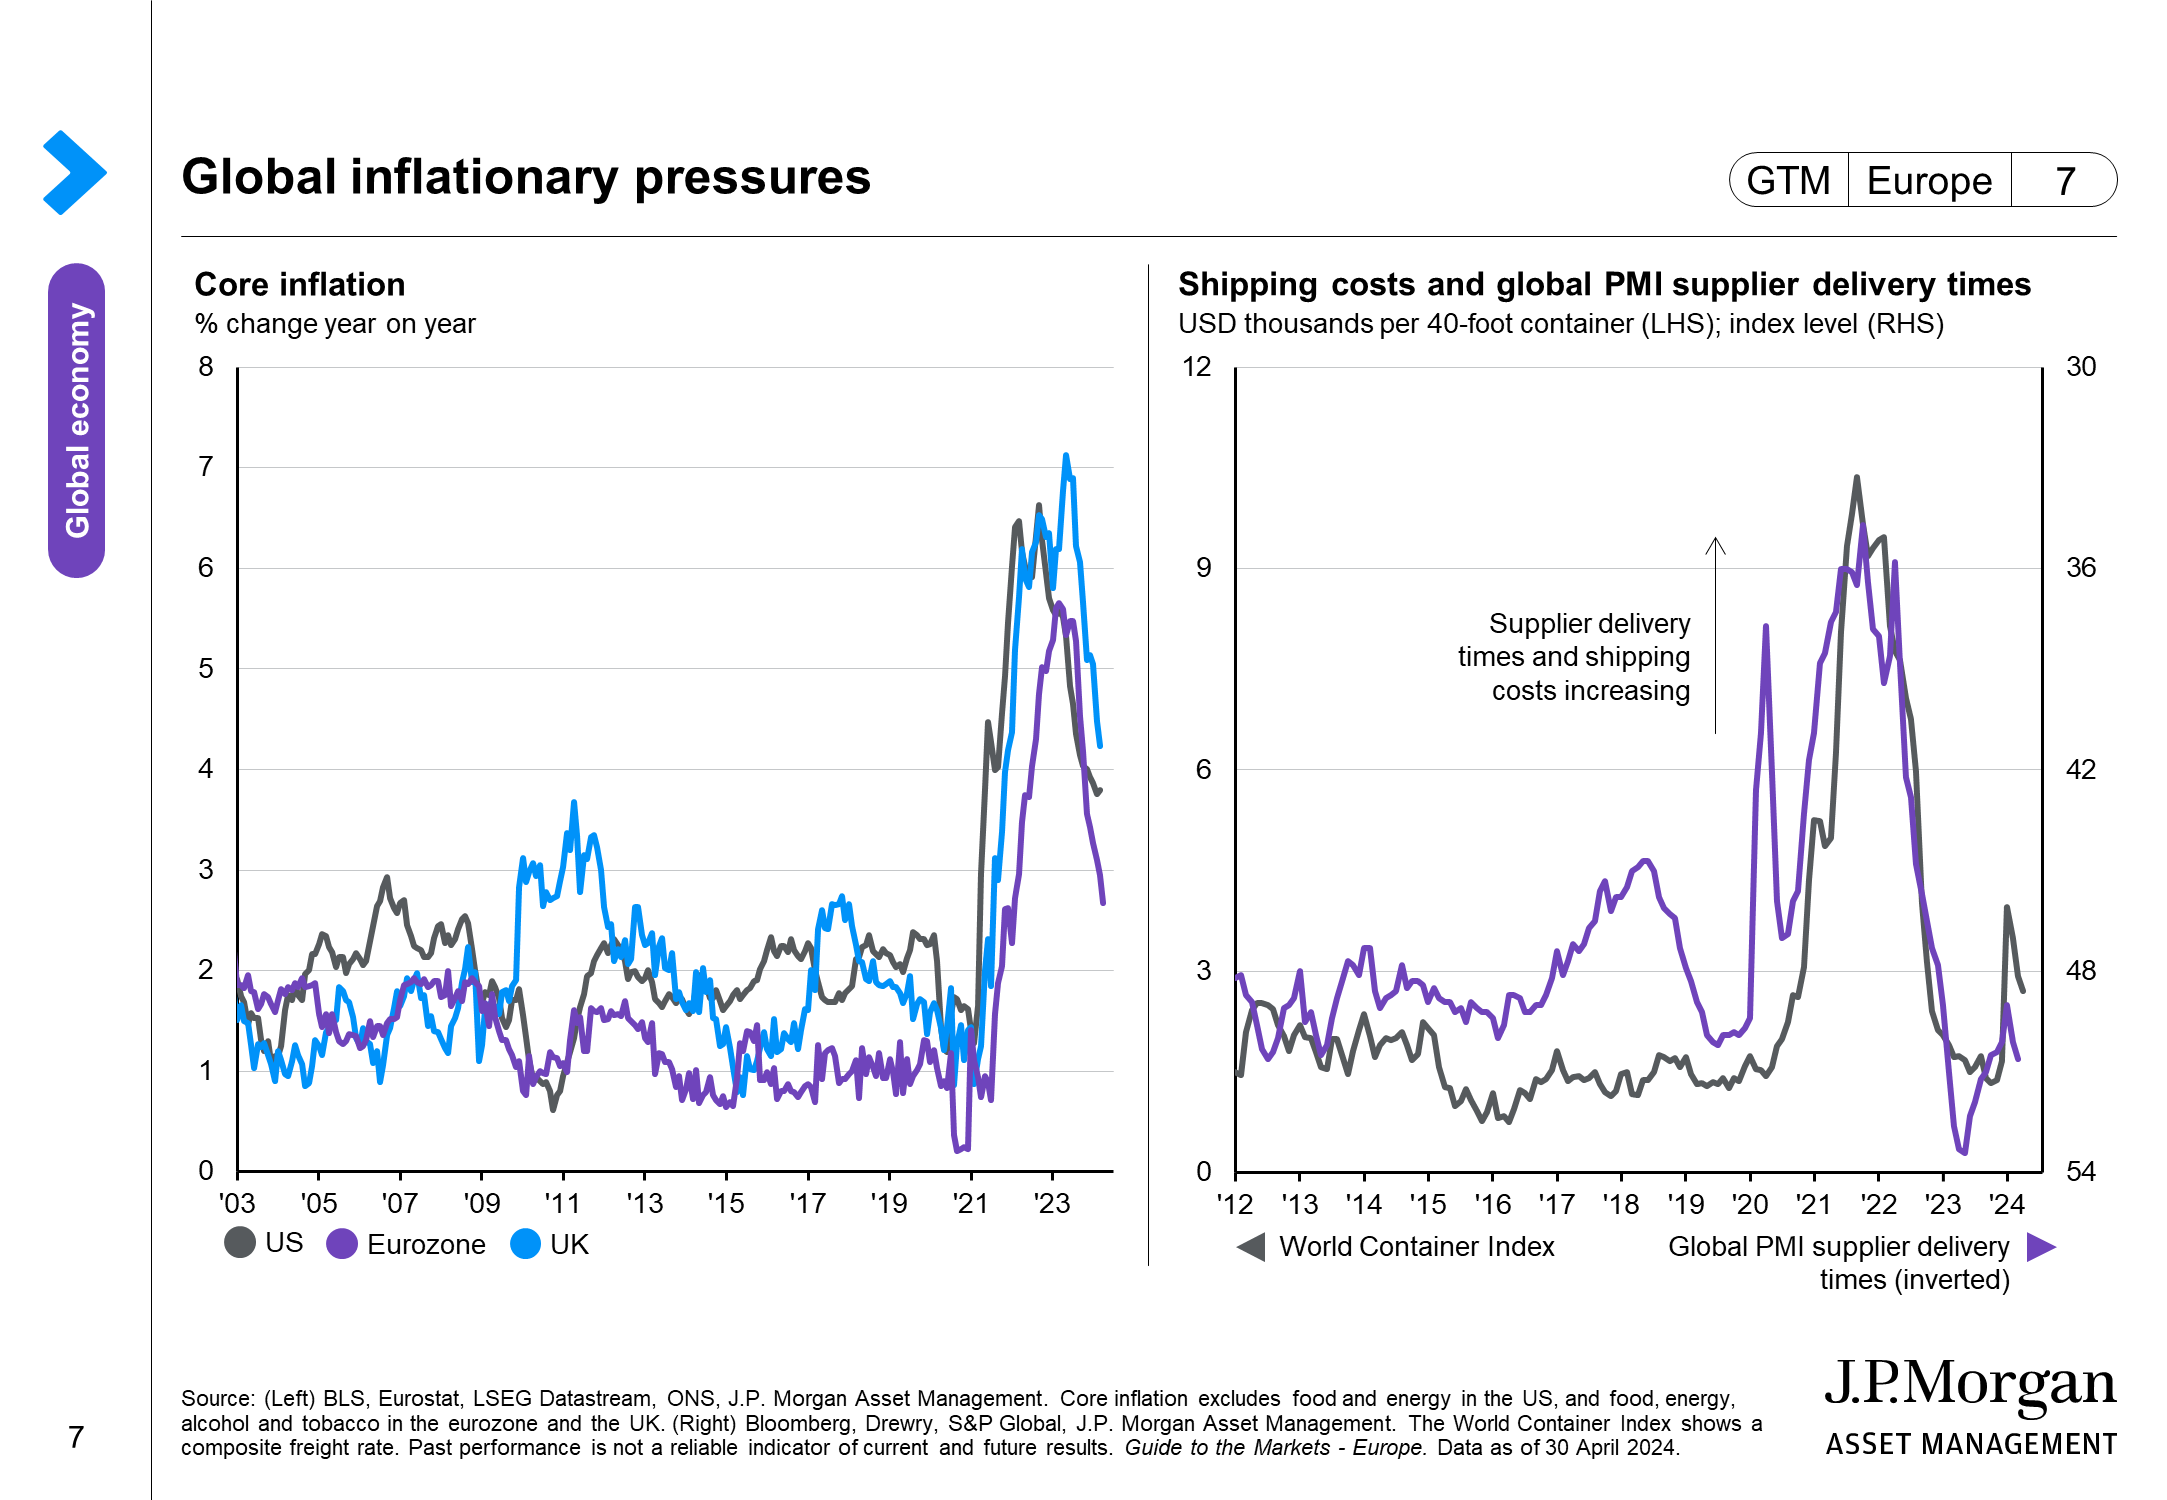 Global inflation expectations